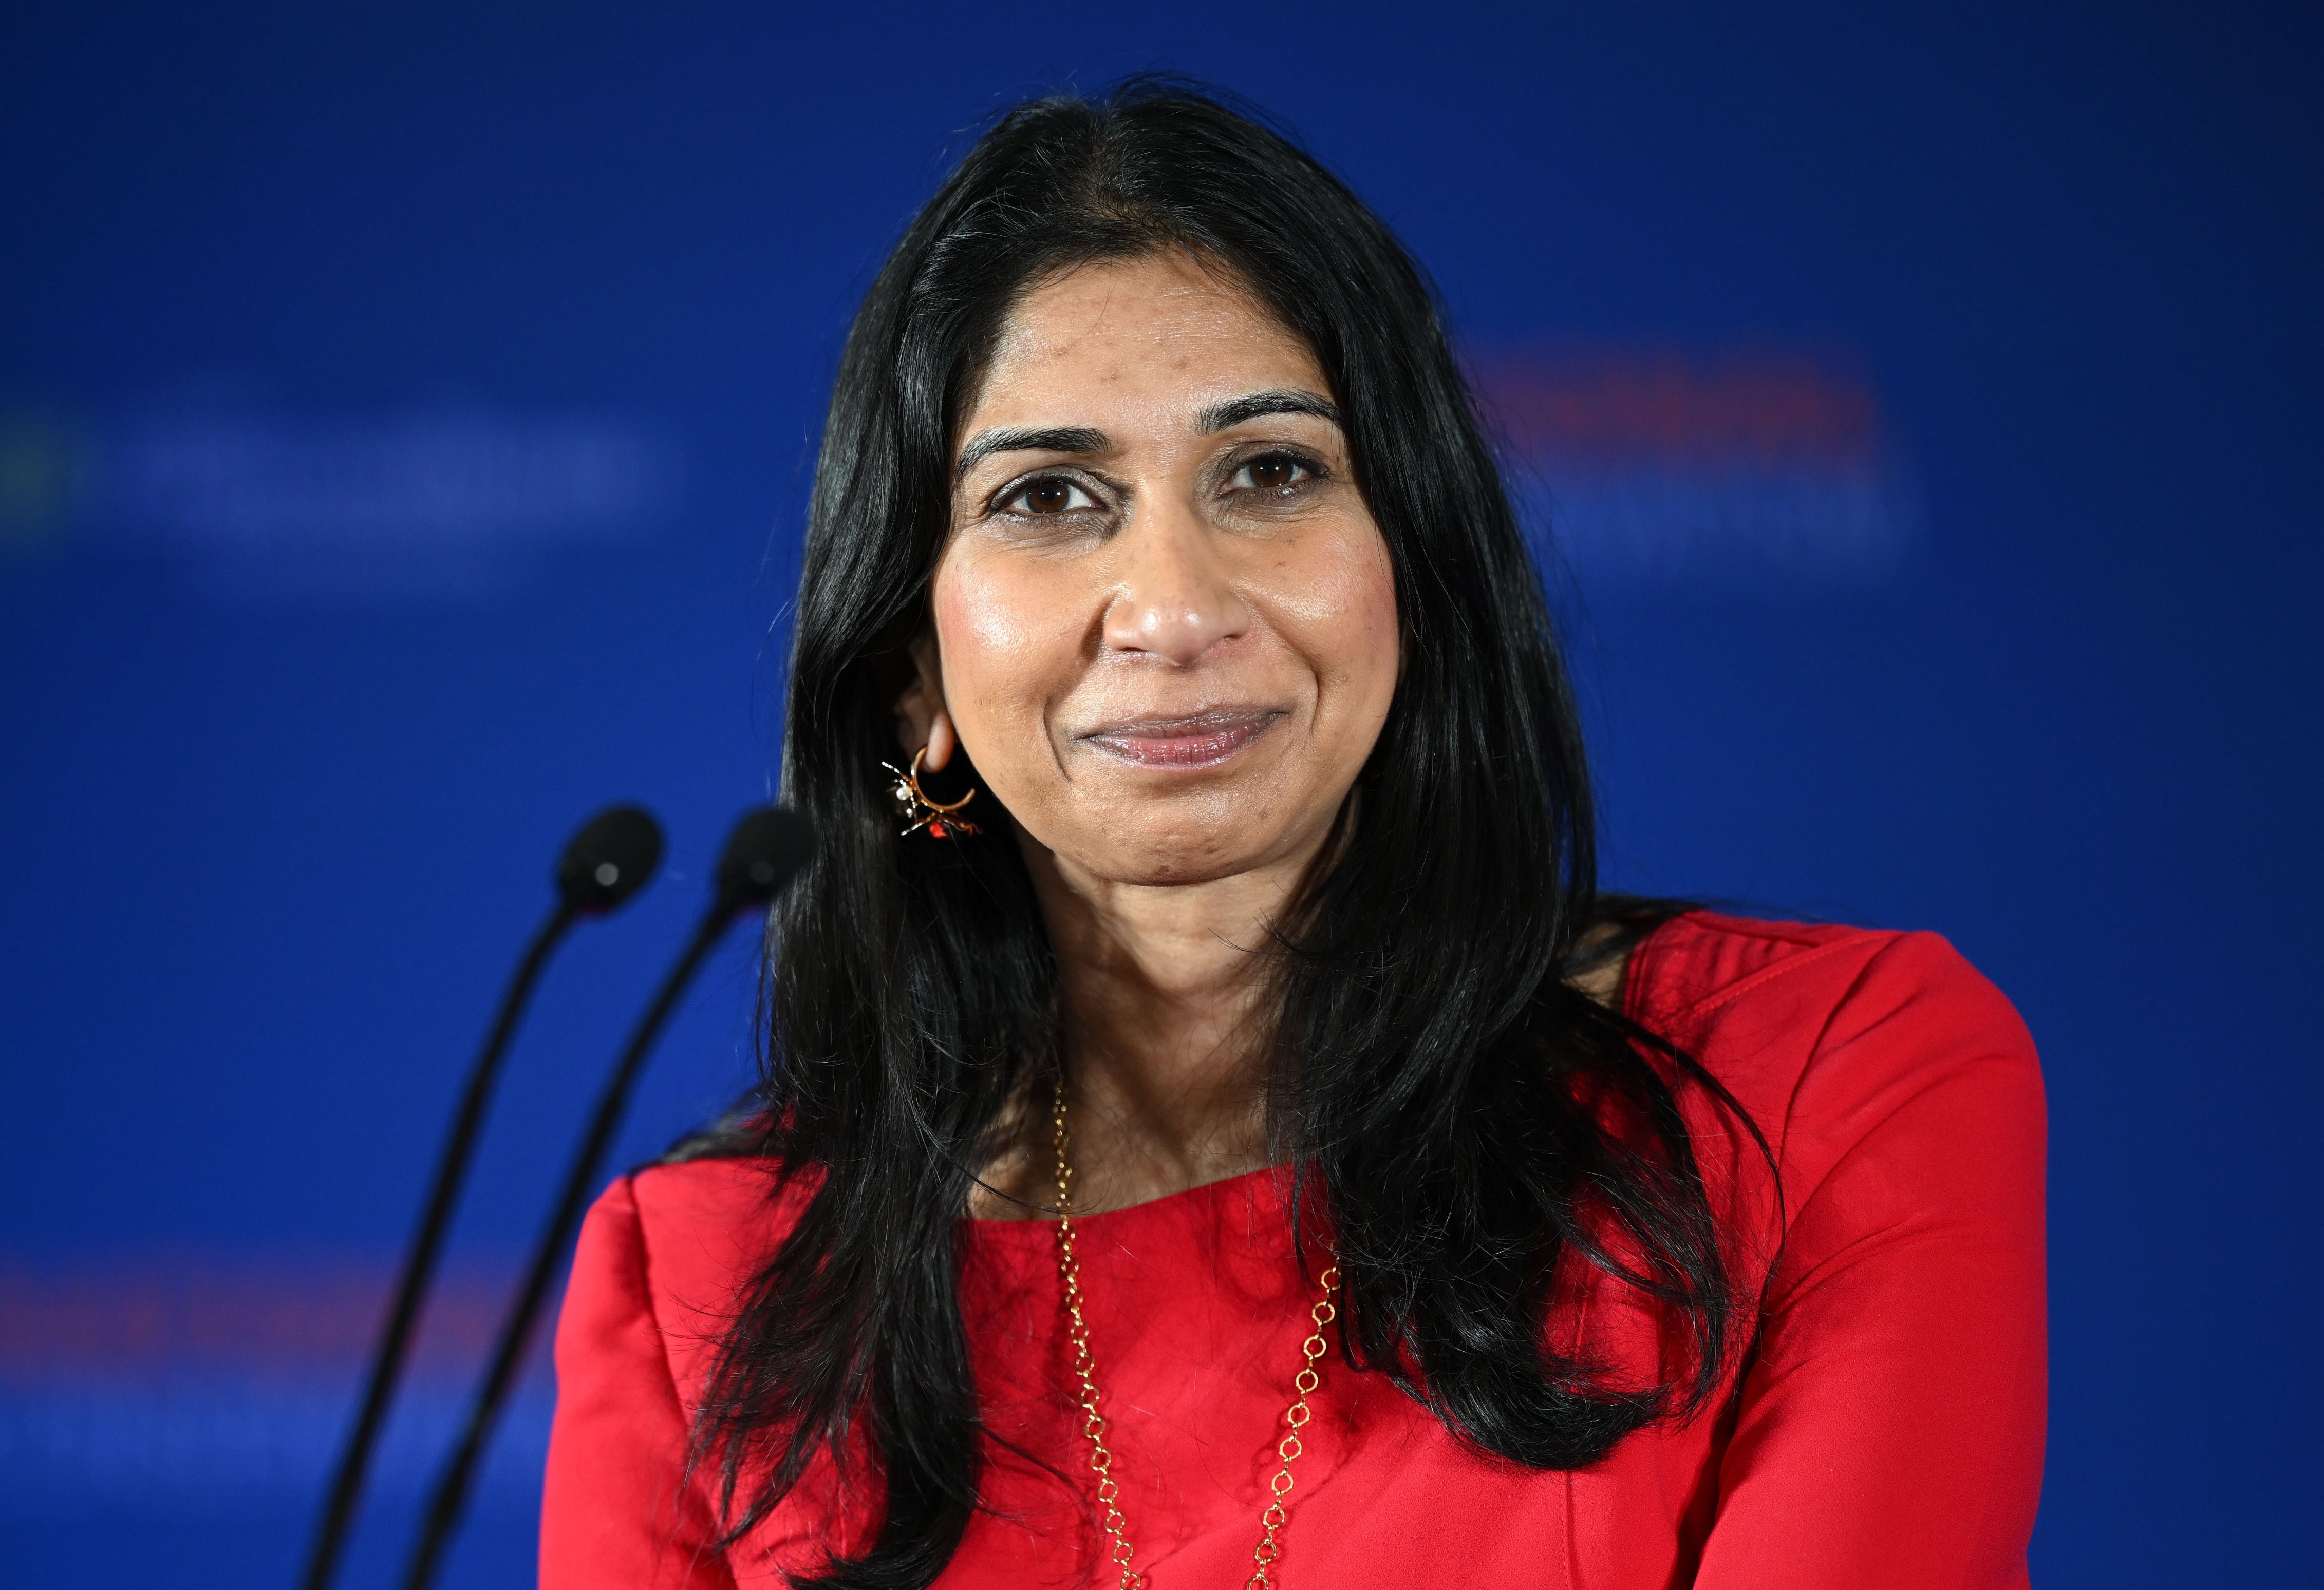 Suella Braverman has called for the two-child benefit cap to be scrapped